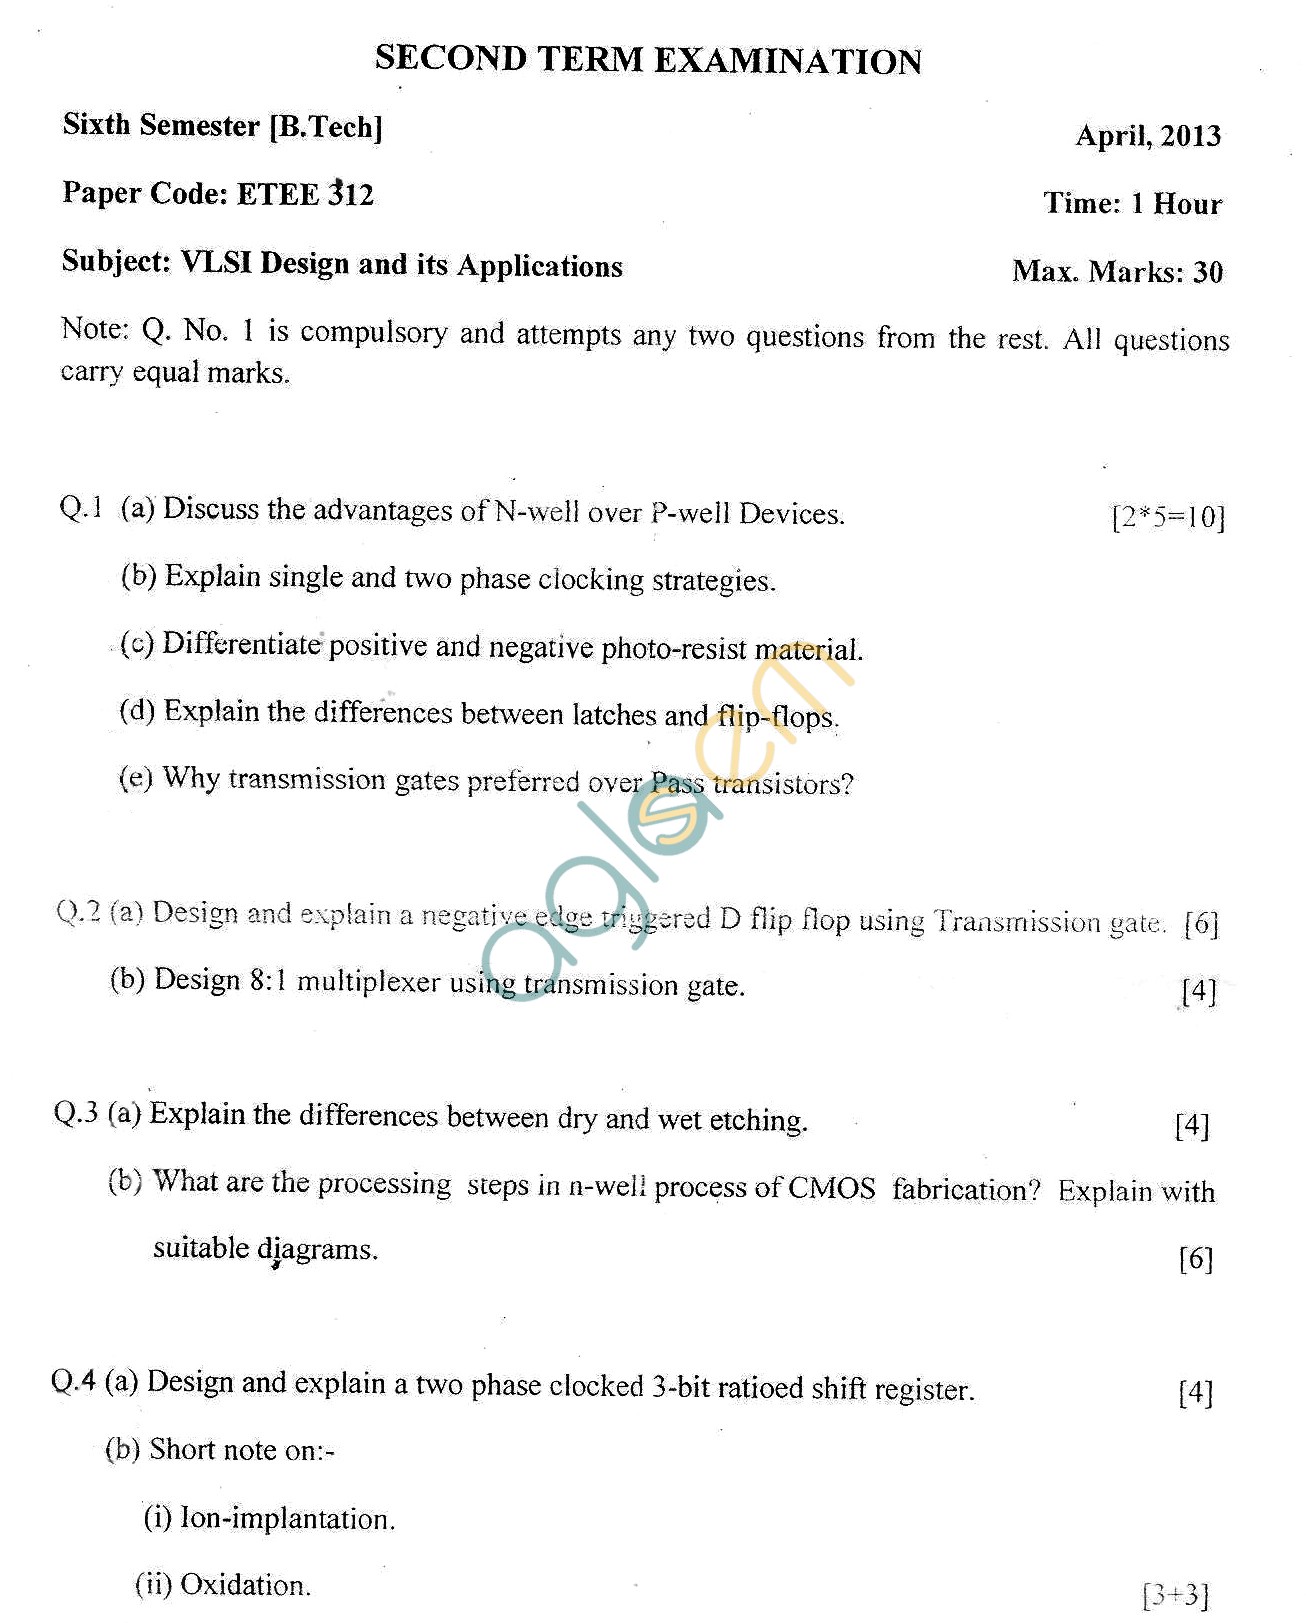 GGSIPU Question Papers Sixth Semester  Second Term 2013  ETEE-312